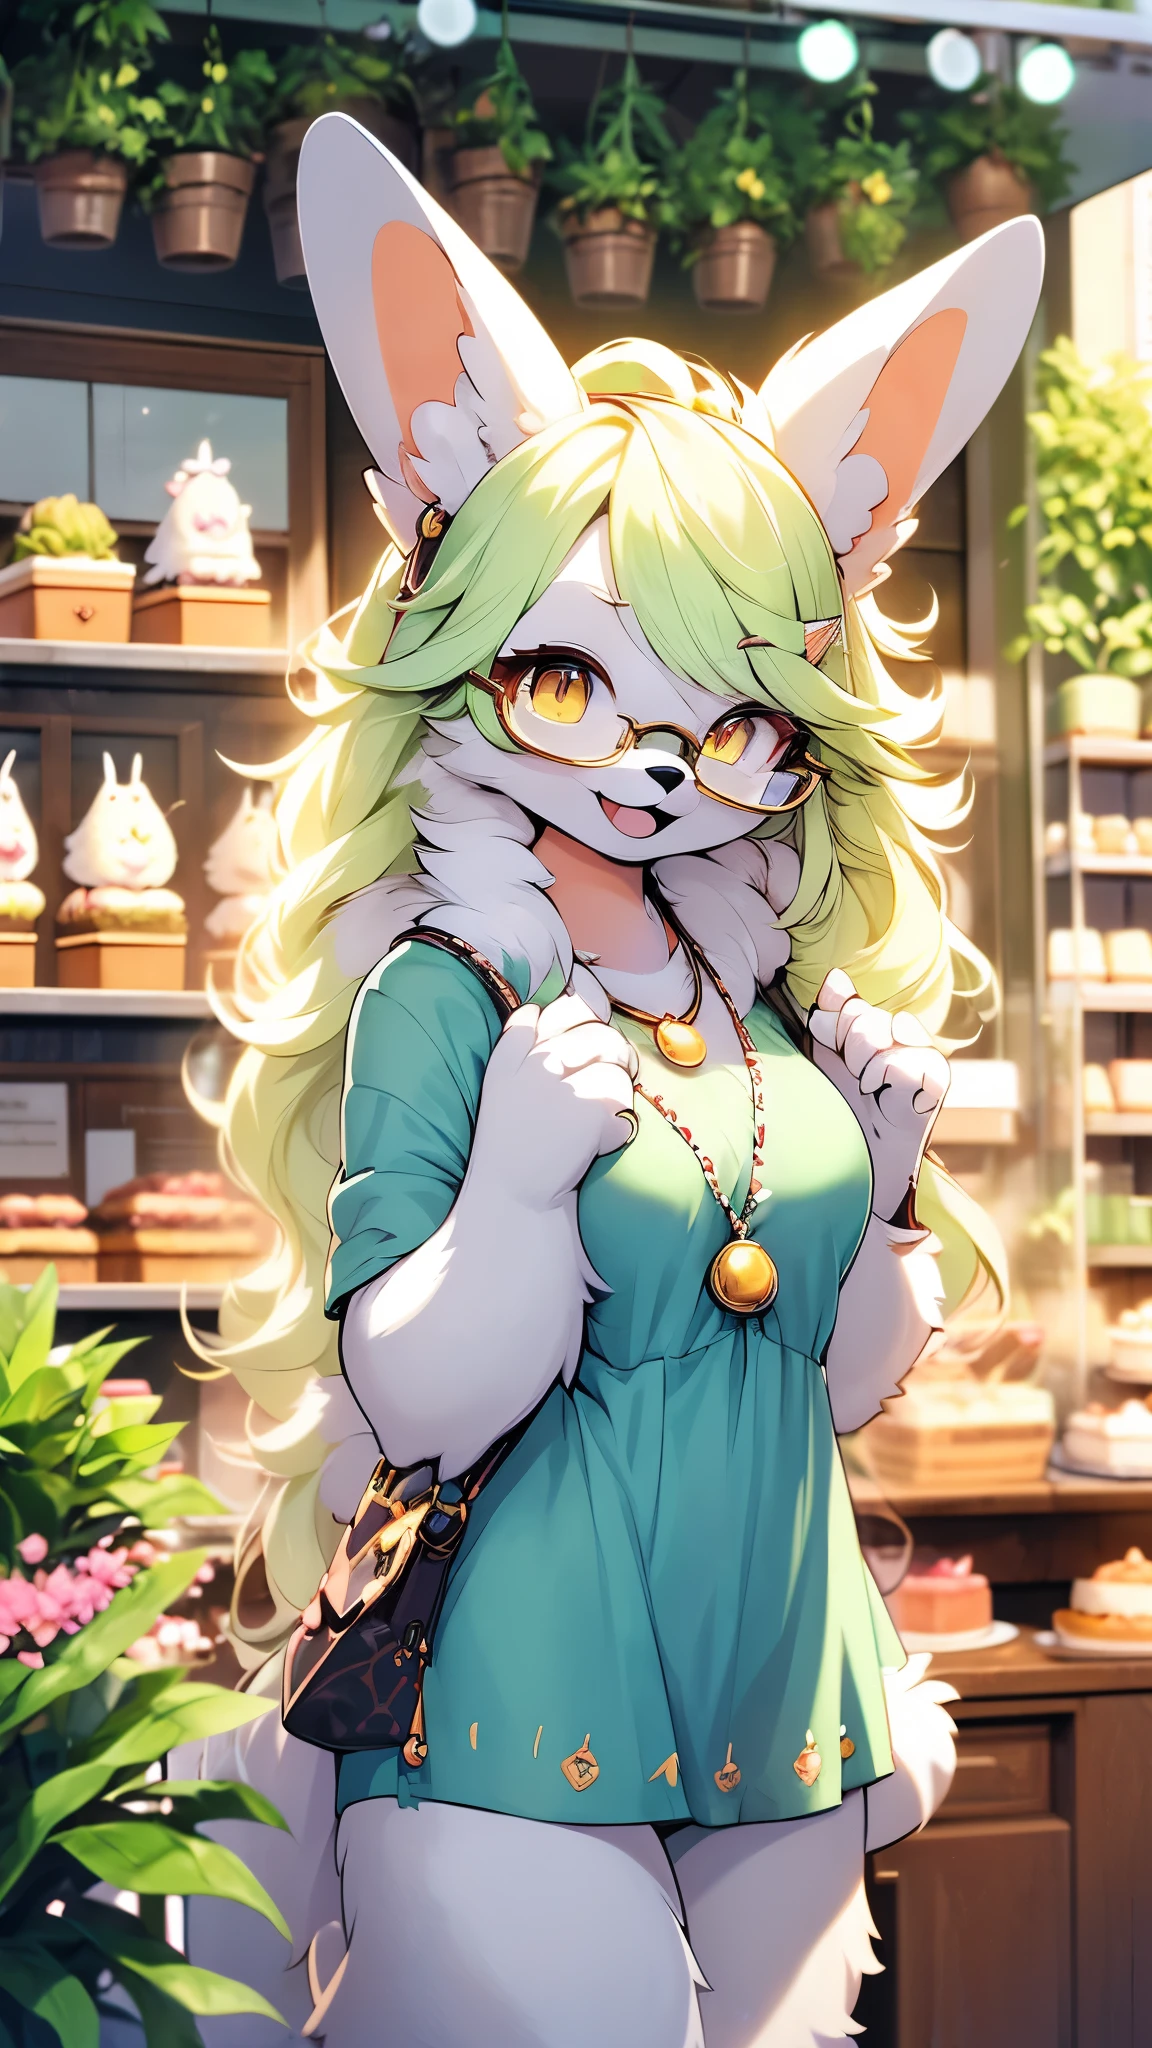 (fluffy anthro furry: 1.6),rabbit girl,female furry,yellow long hair,rabbit ears,glasses,necklace,flora hairpin,arm brecelet,looking at viewer,smile,open mouth,short dress,pocket bag,show cleaveage,cake shop,bend forward